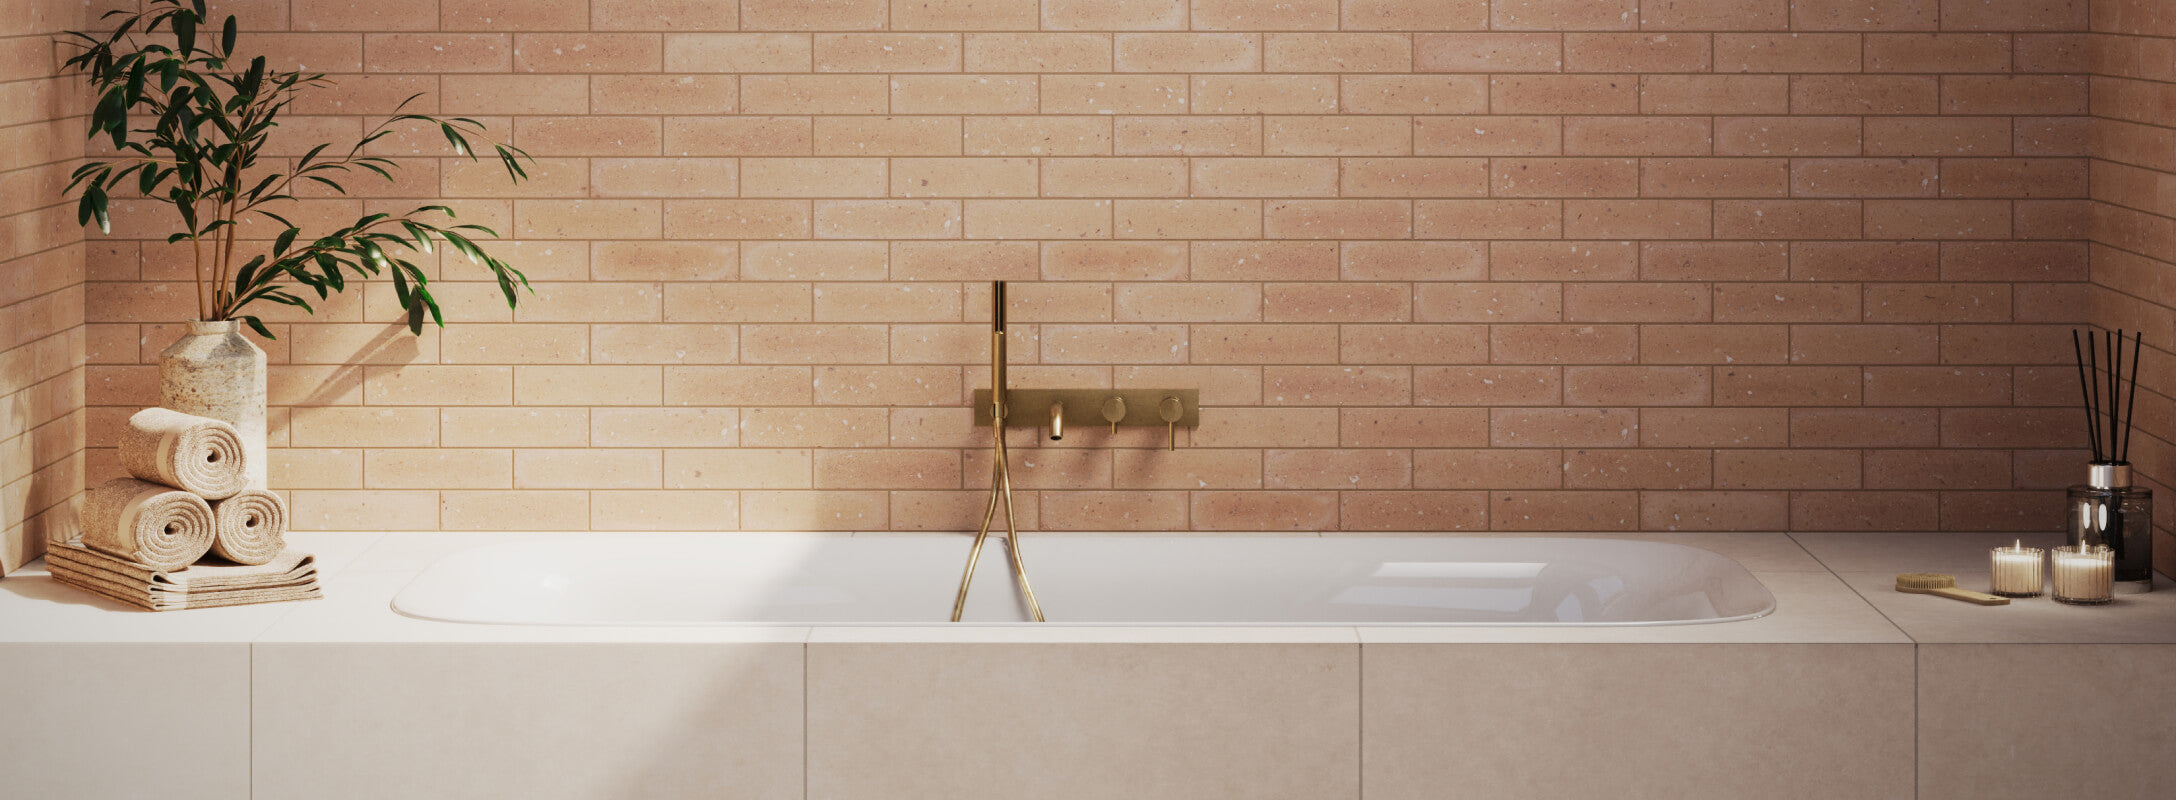 Warm orange-toned tiles in a sleek subway layout, adding a soft, serene ambiance to this spa-like bathroom setting